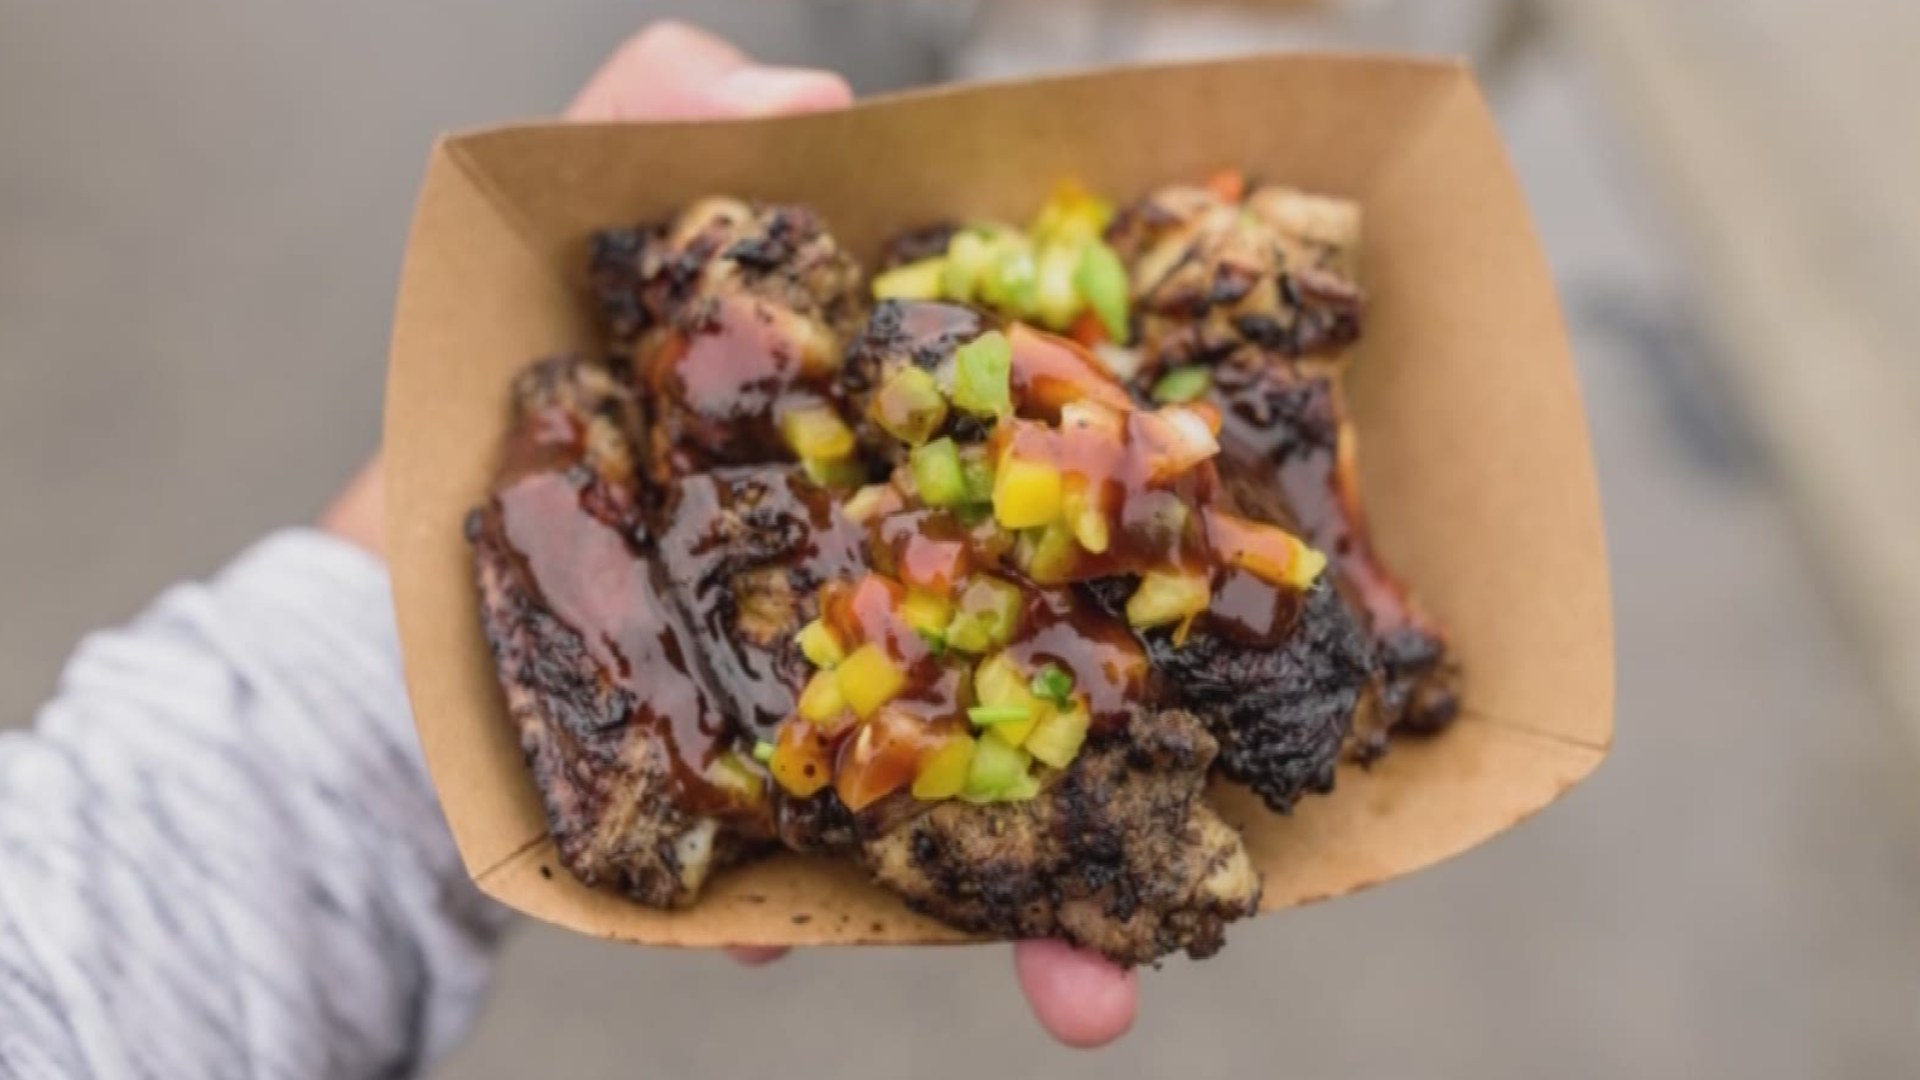 Calling all BBQ fans! You can drive over to the west side to eat at the Jerk Shack!